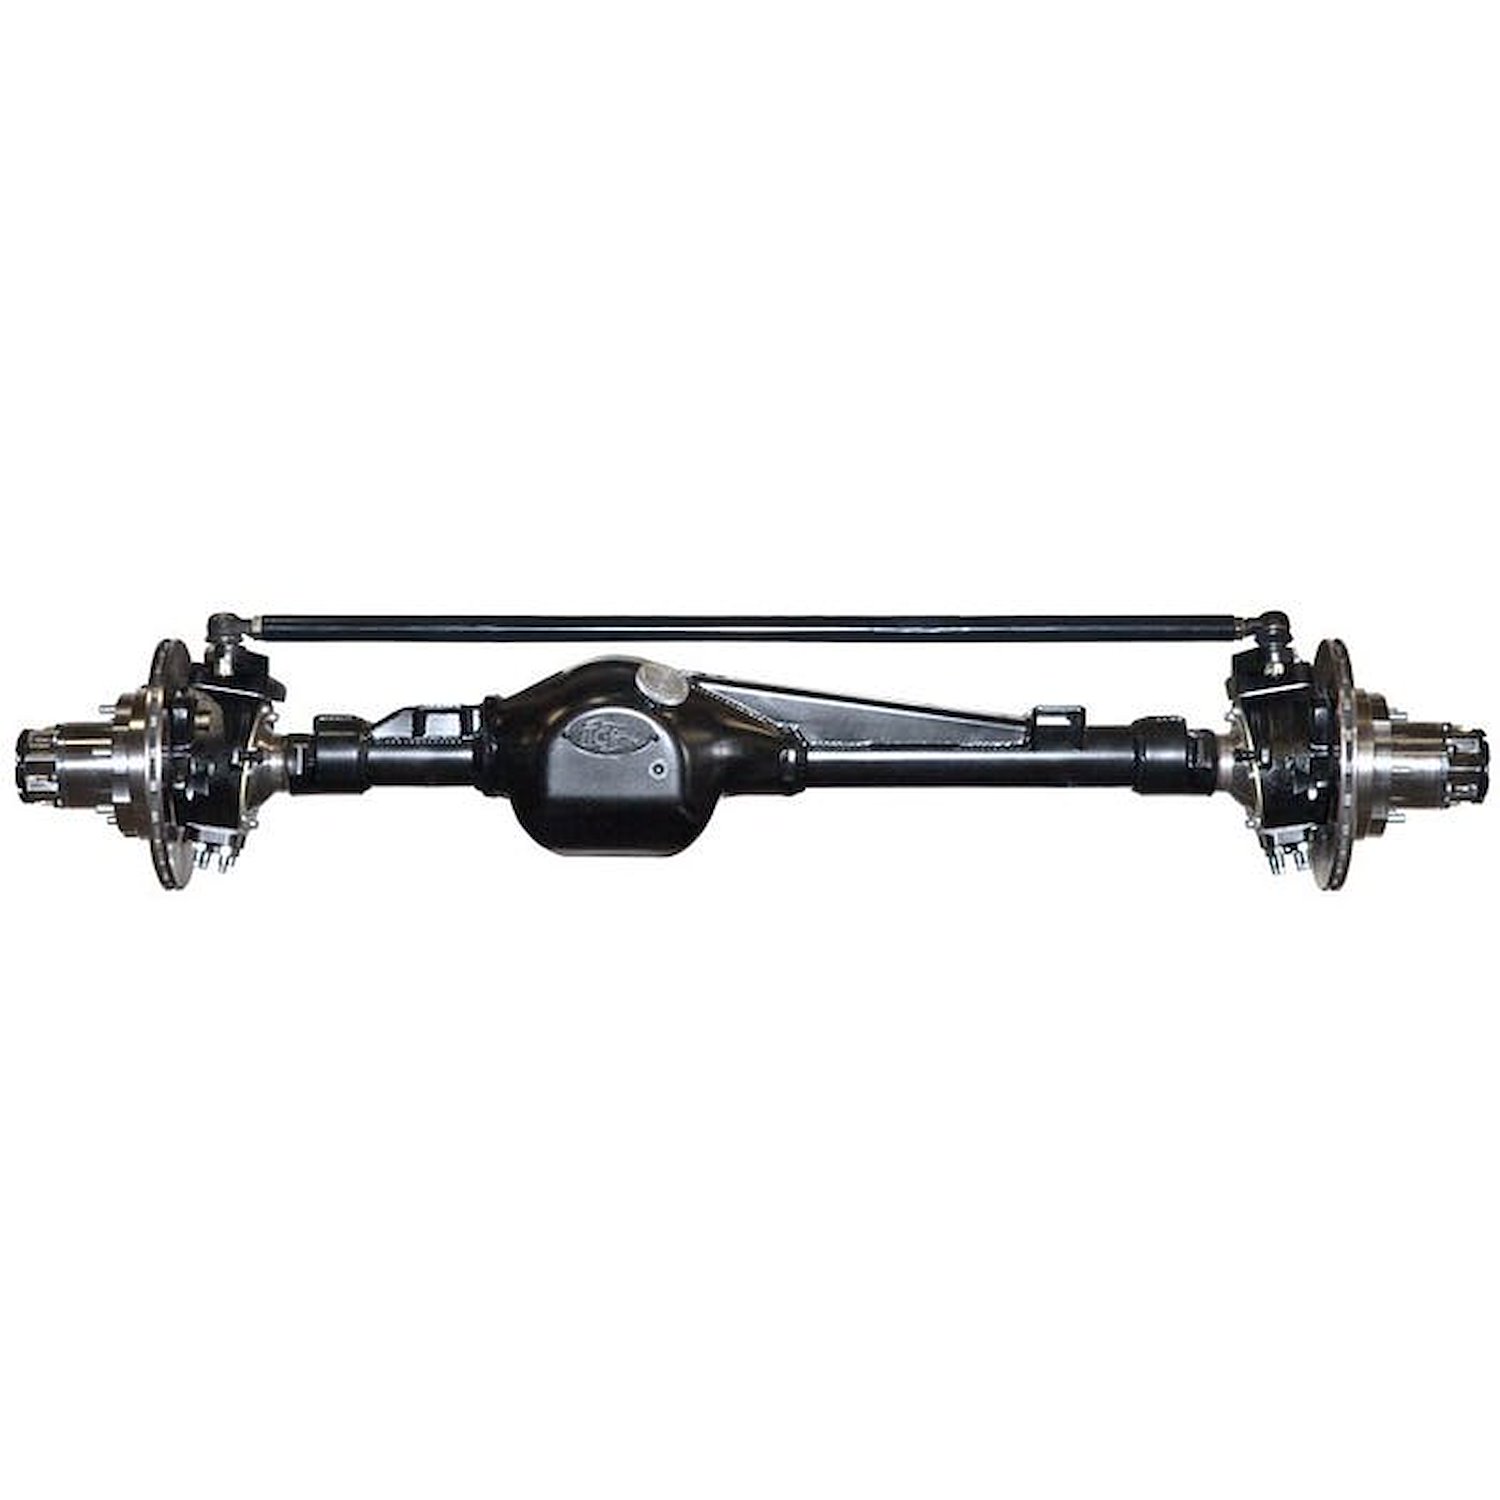 301643-1-KIT Rock Assault Fully-Built Front Axles, +5 Width, LHD, 4-Cylinder, 5.29, Grizzly, Locking Hubs, Toyota